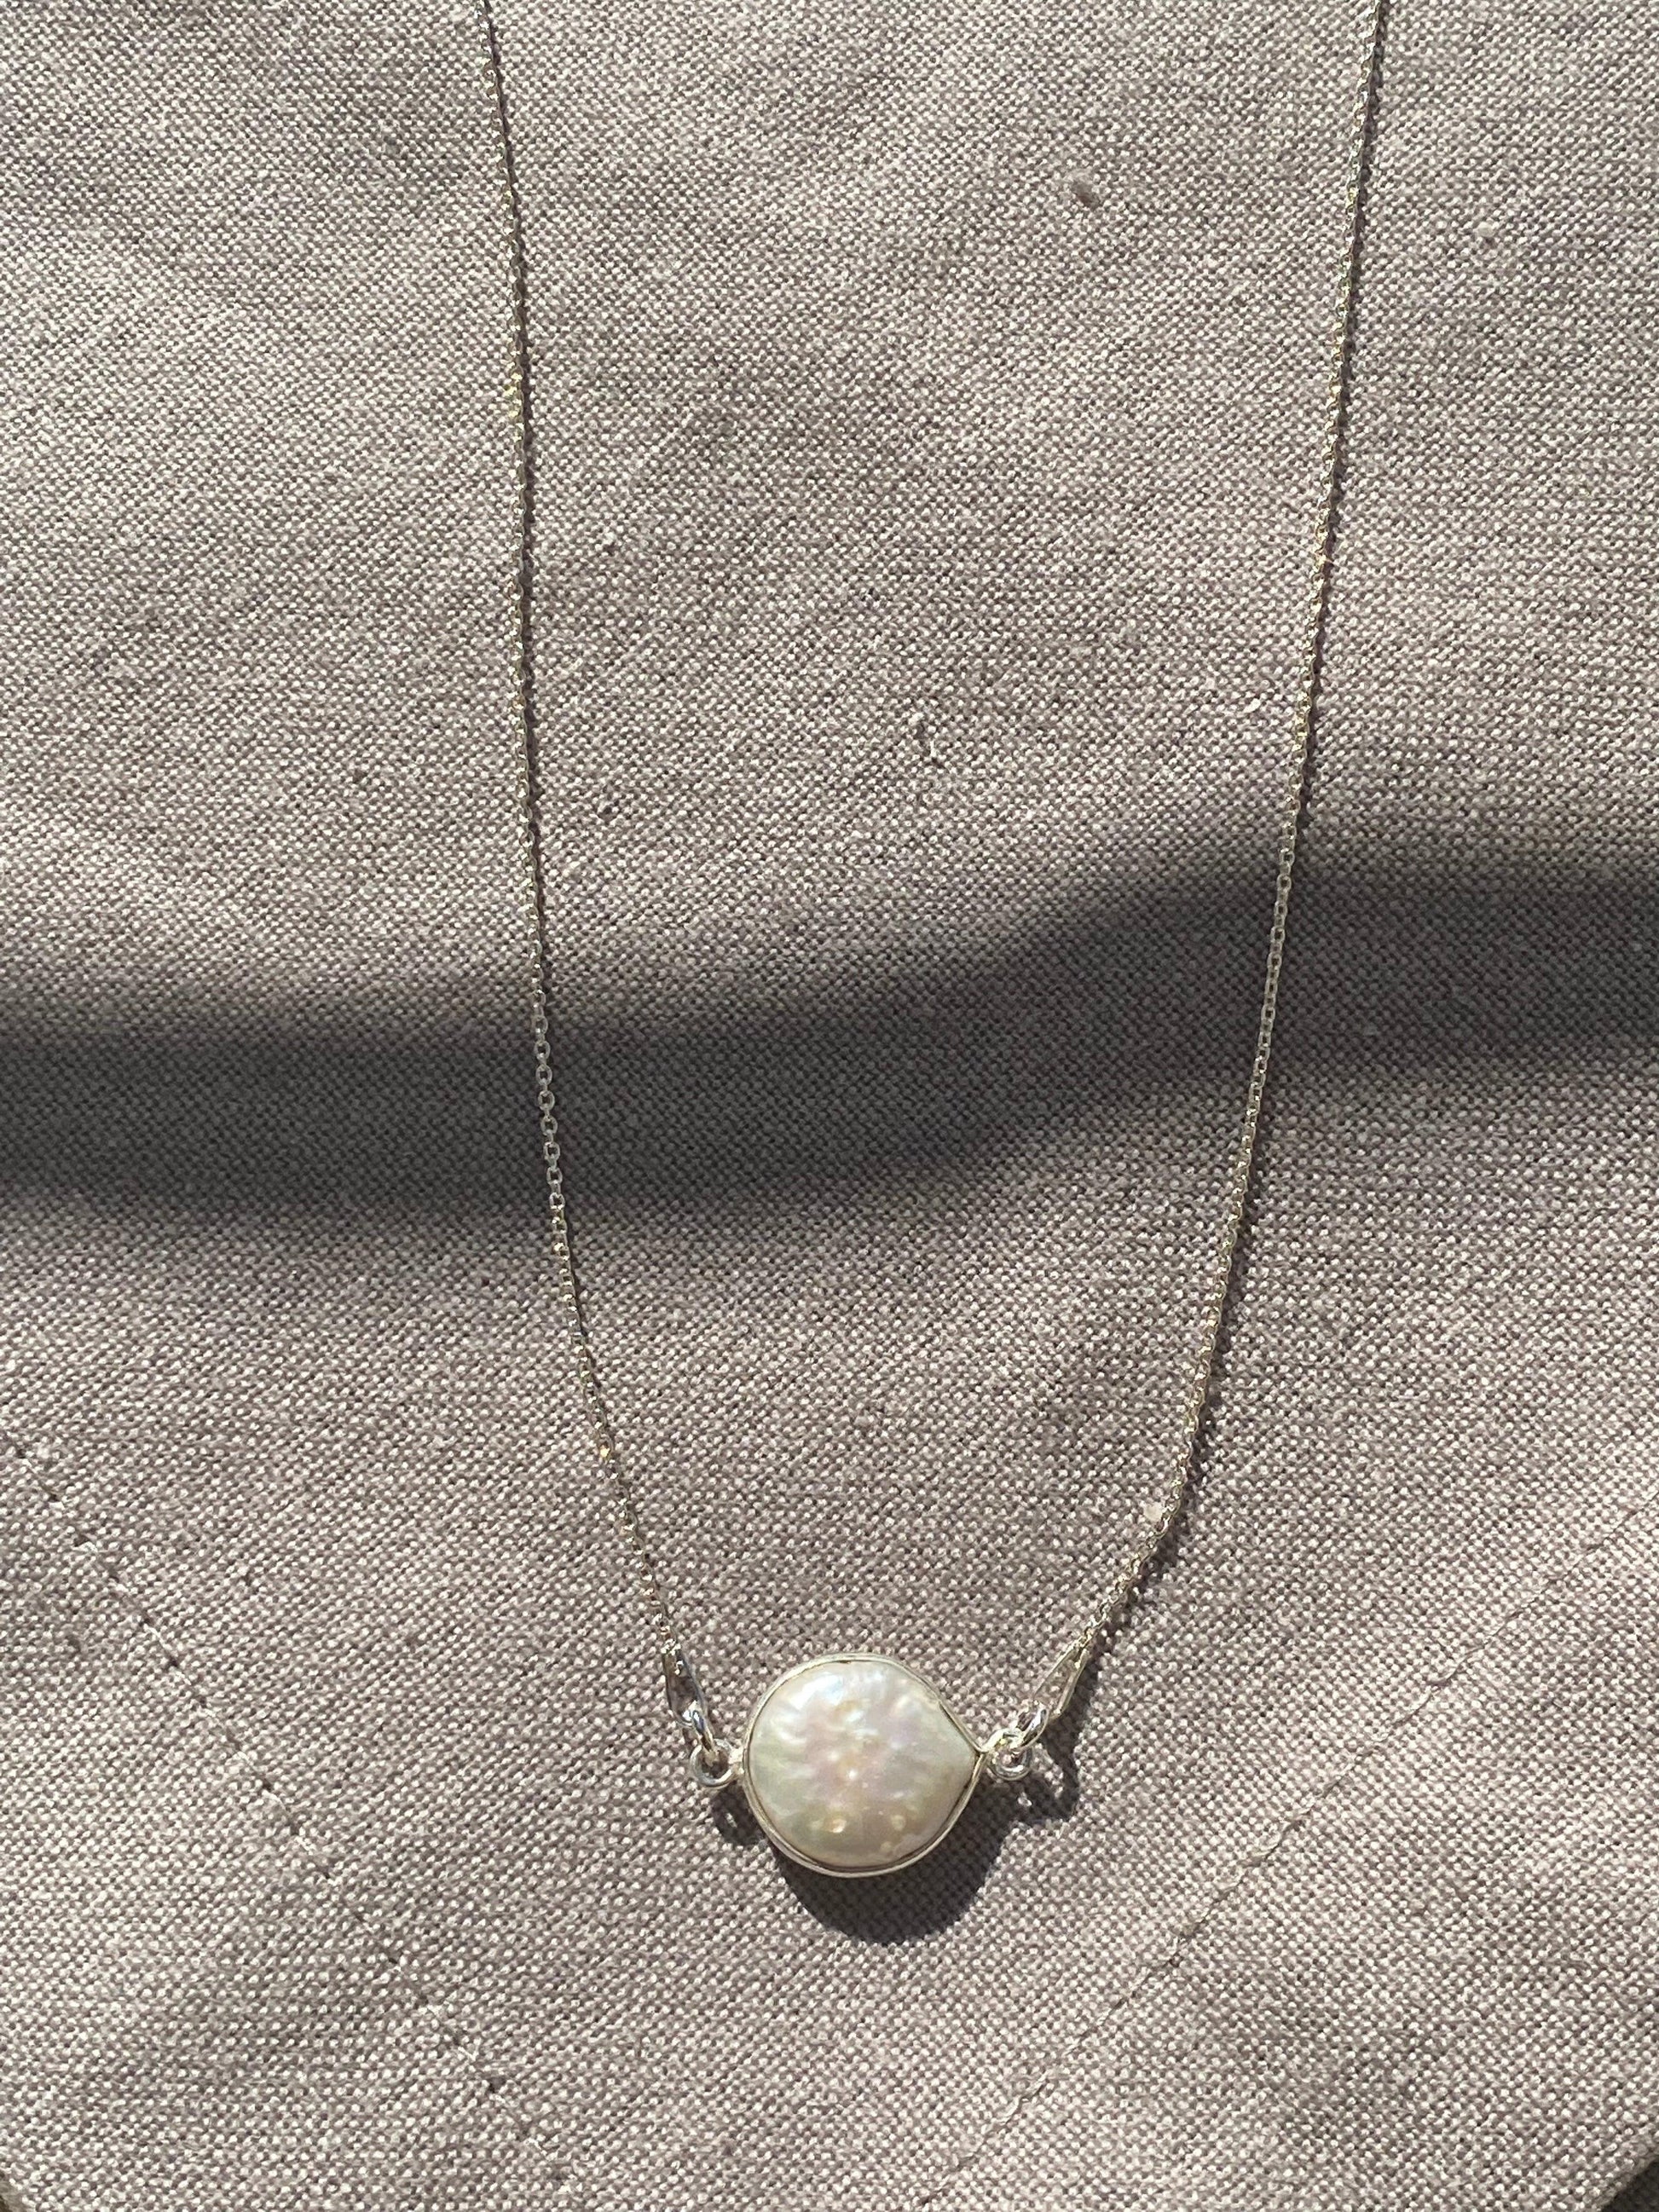 Freshwater Pearl Necklace - Kybalion Jewellery